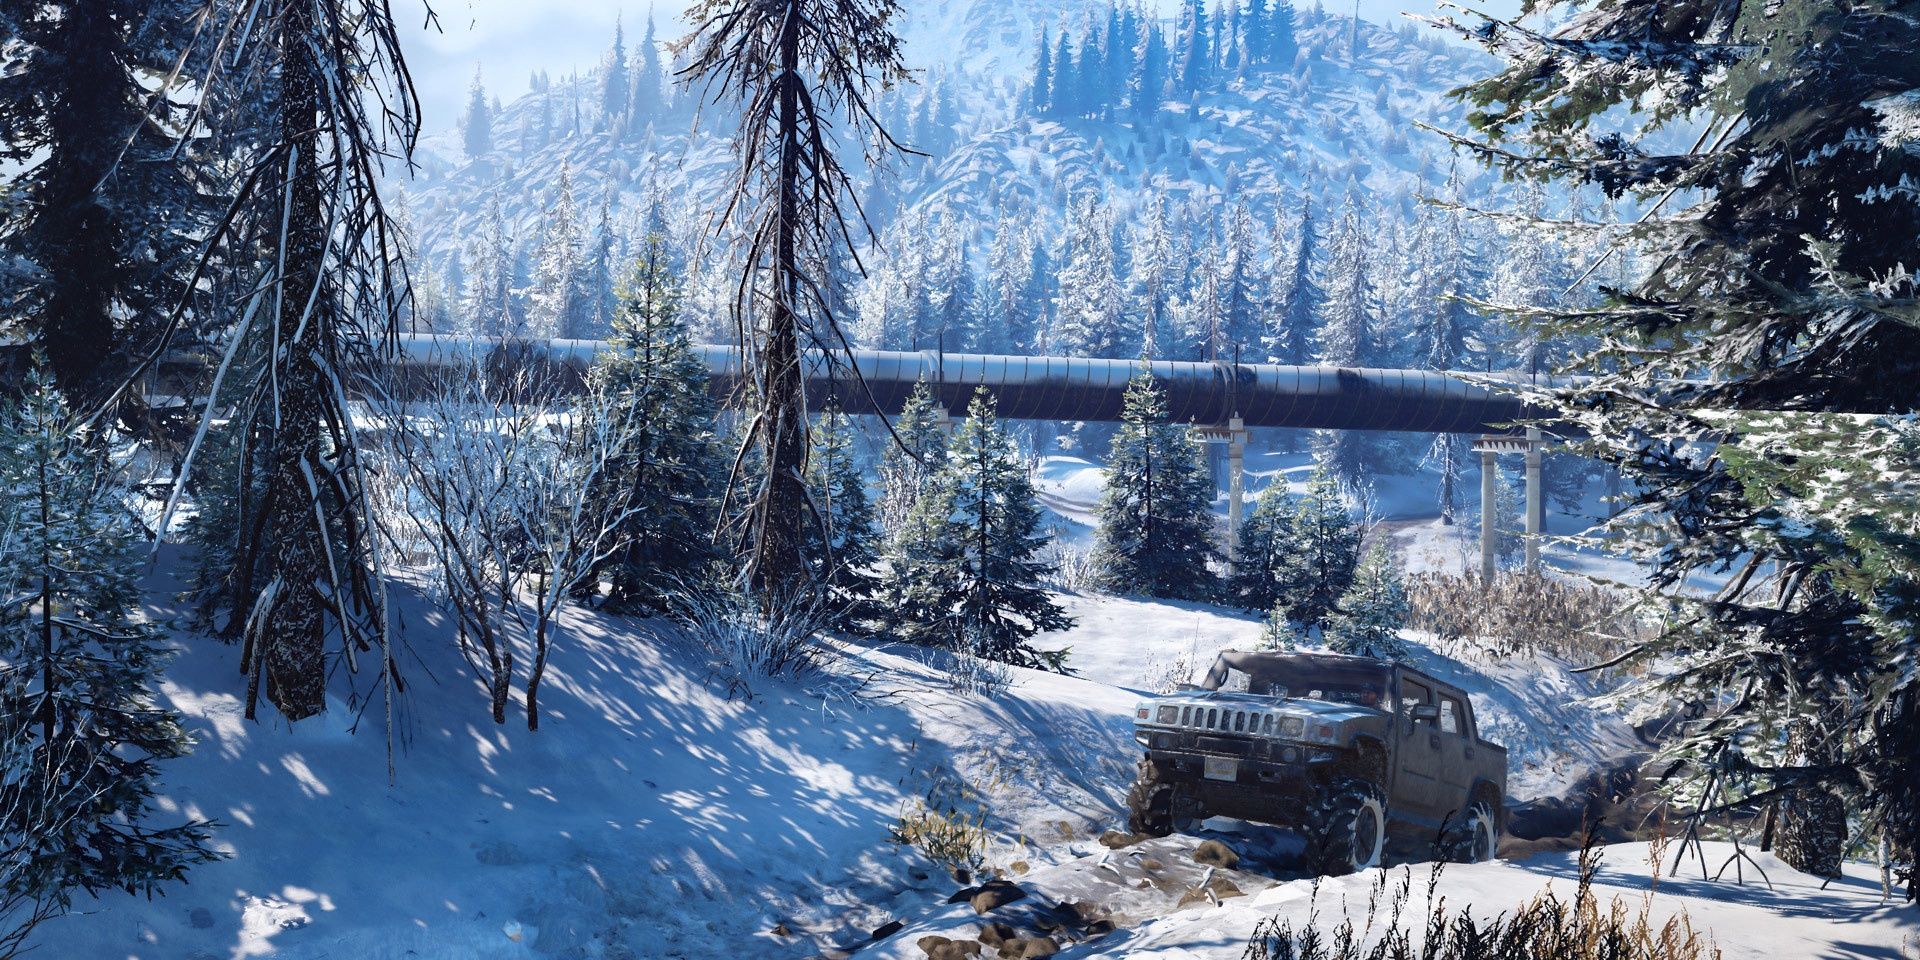 A SnowRunner screenshot of a jeep driving through the dirt and snow in a mountainous forest